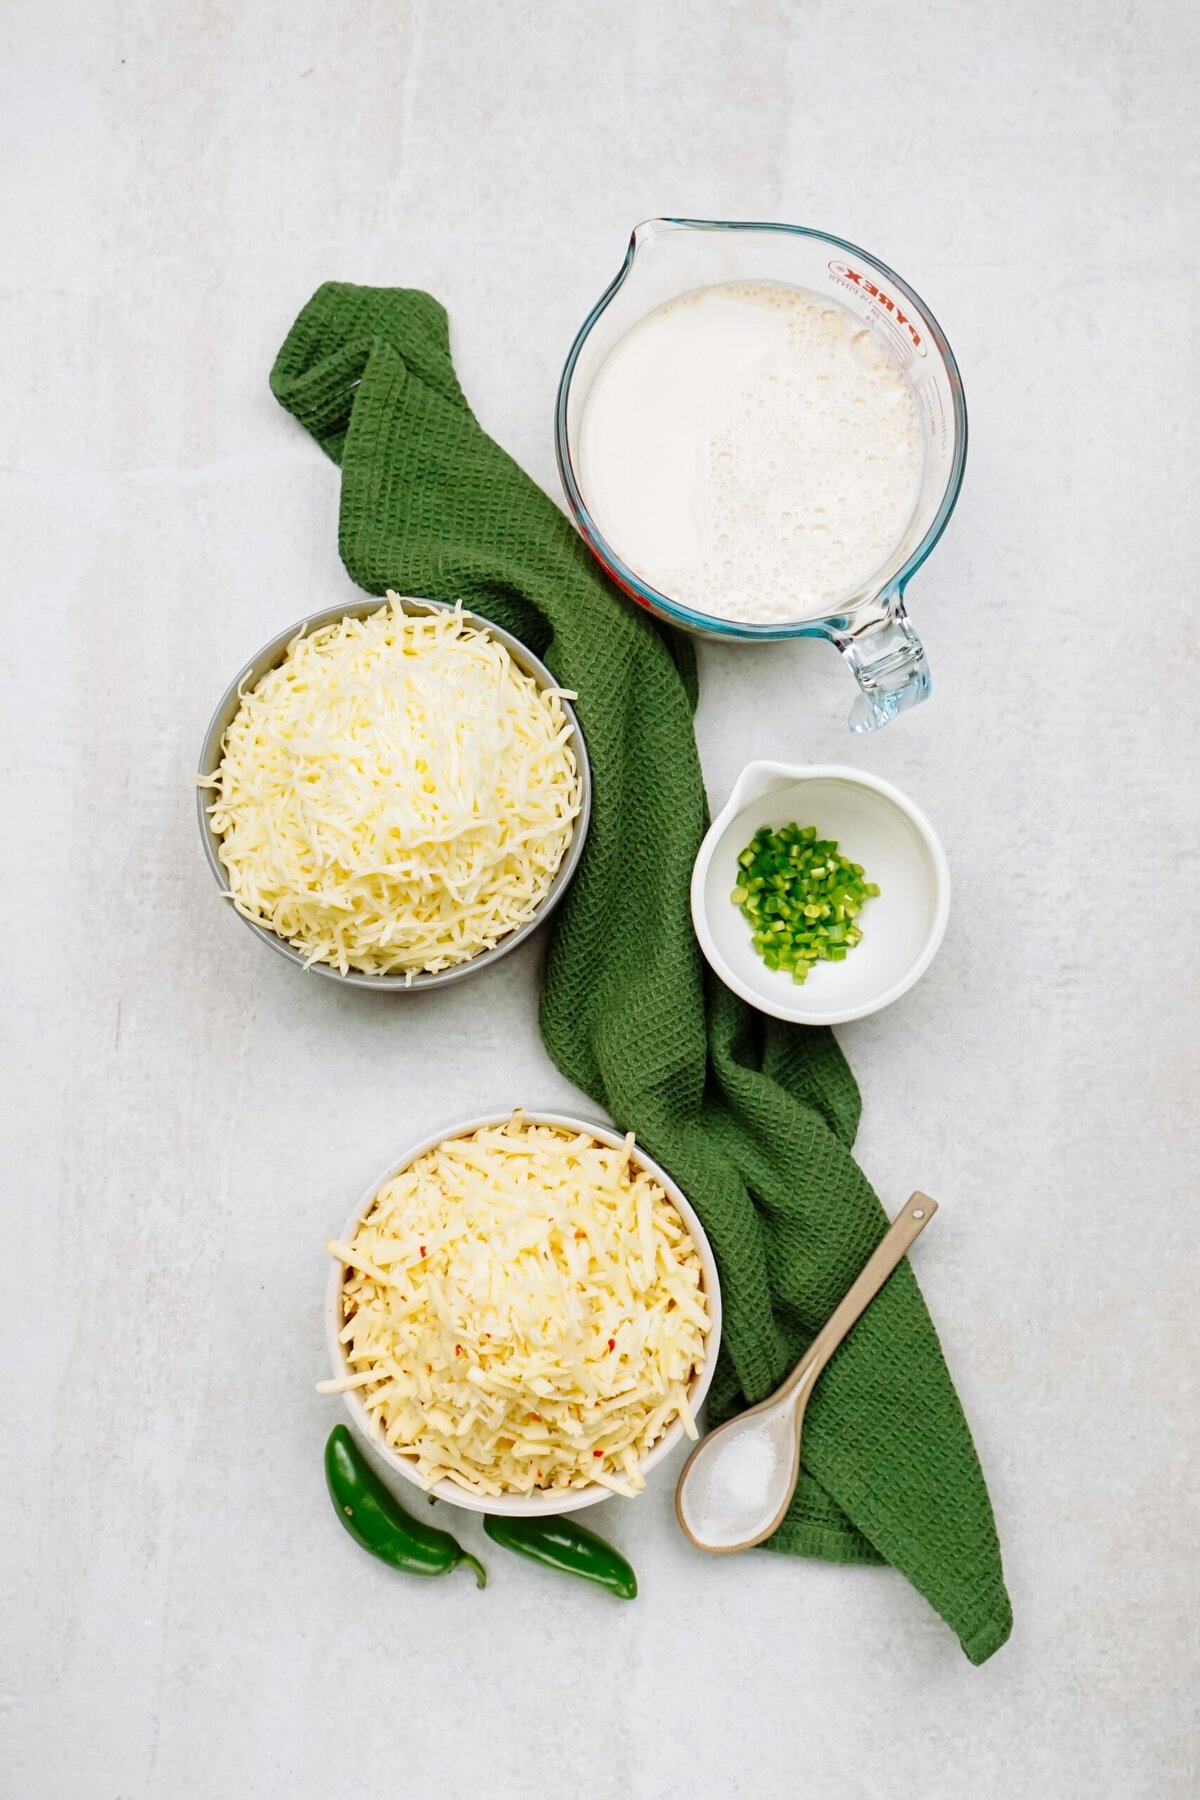 Top-down view of shredded cheese in two bowls, a small bowl of chopped green peppers, a measuring cup of milk for the queso dip, a wooden spoon with salt, and green cloth on a light surface.